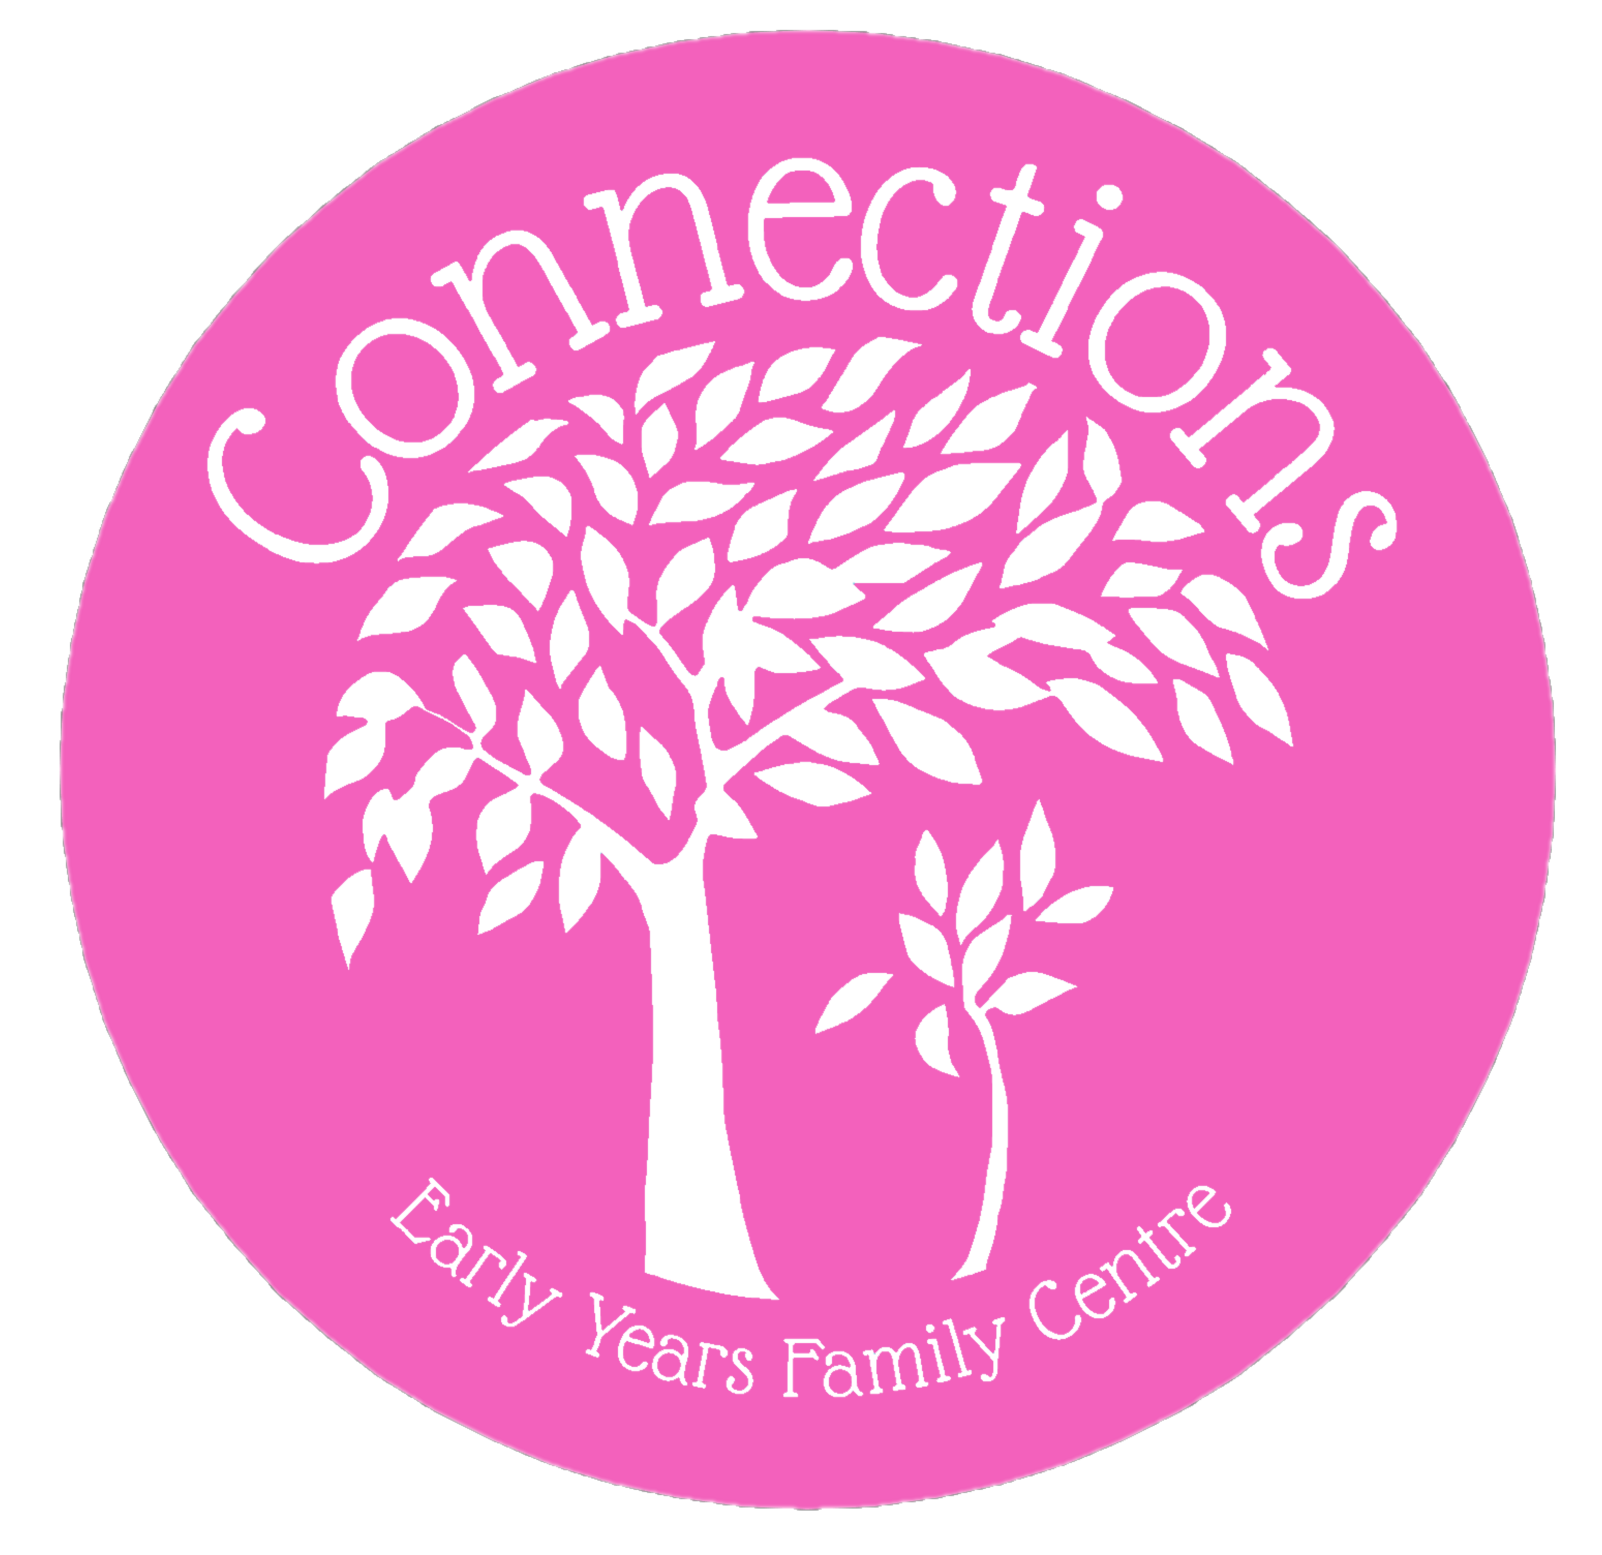 Connections Early Years Family Centre logo